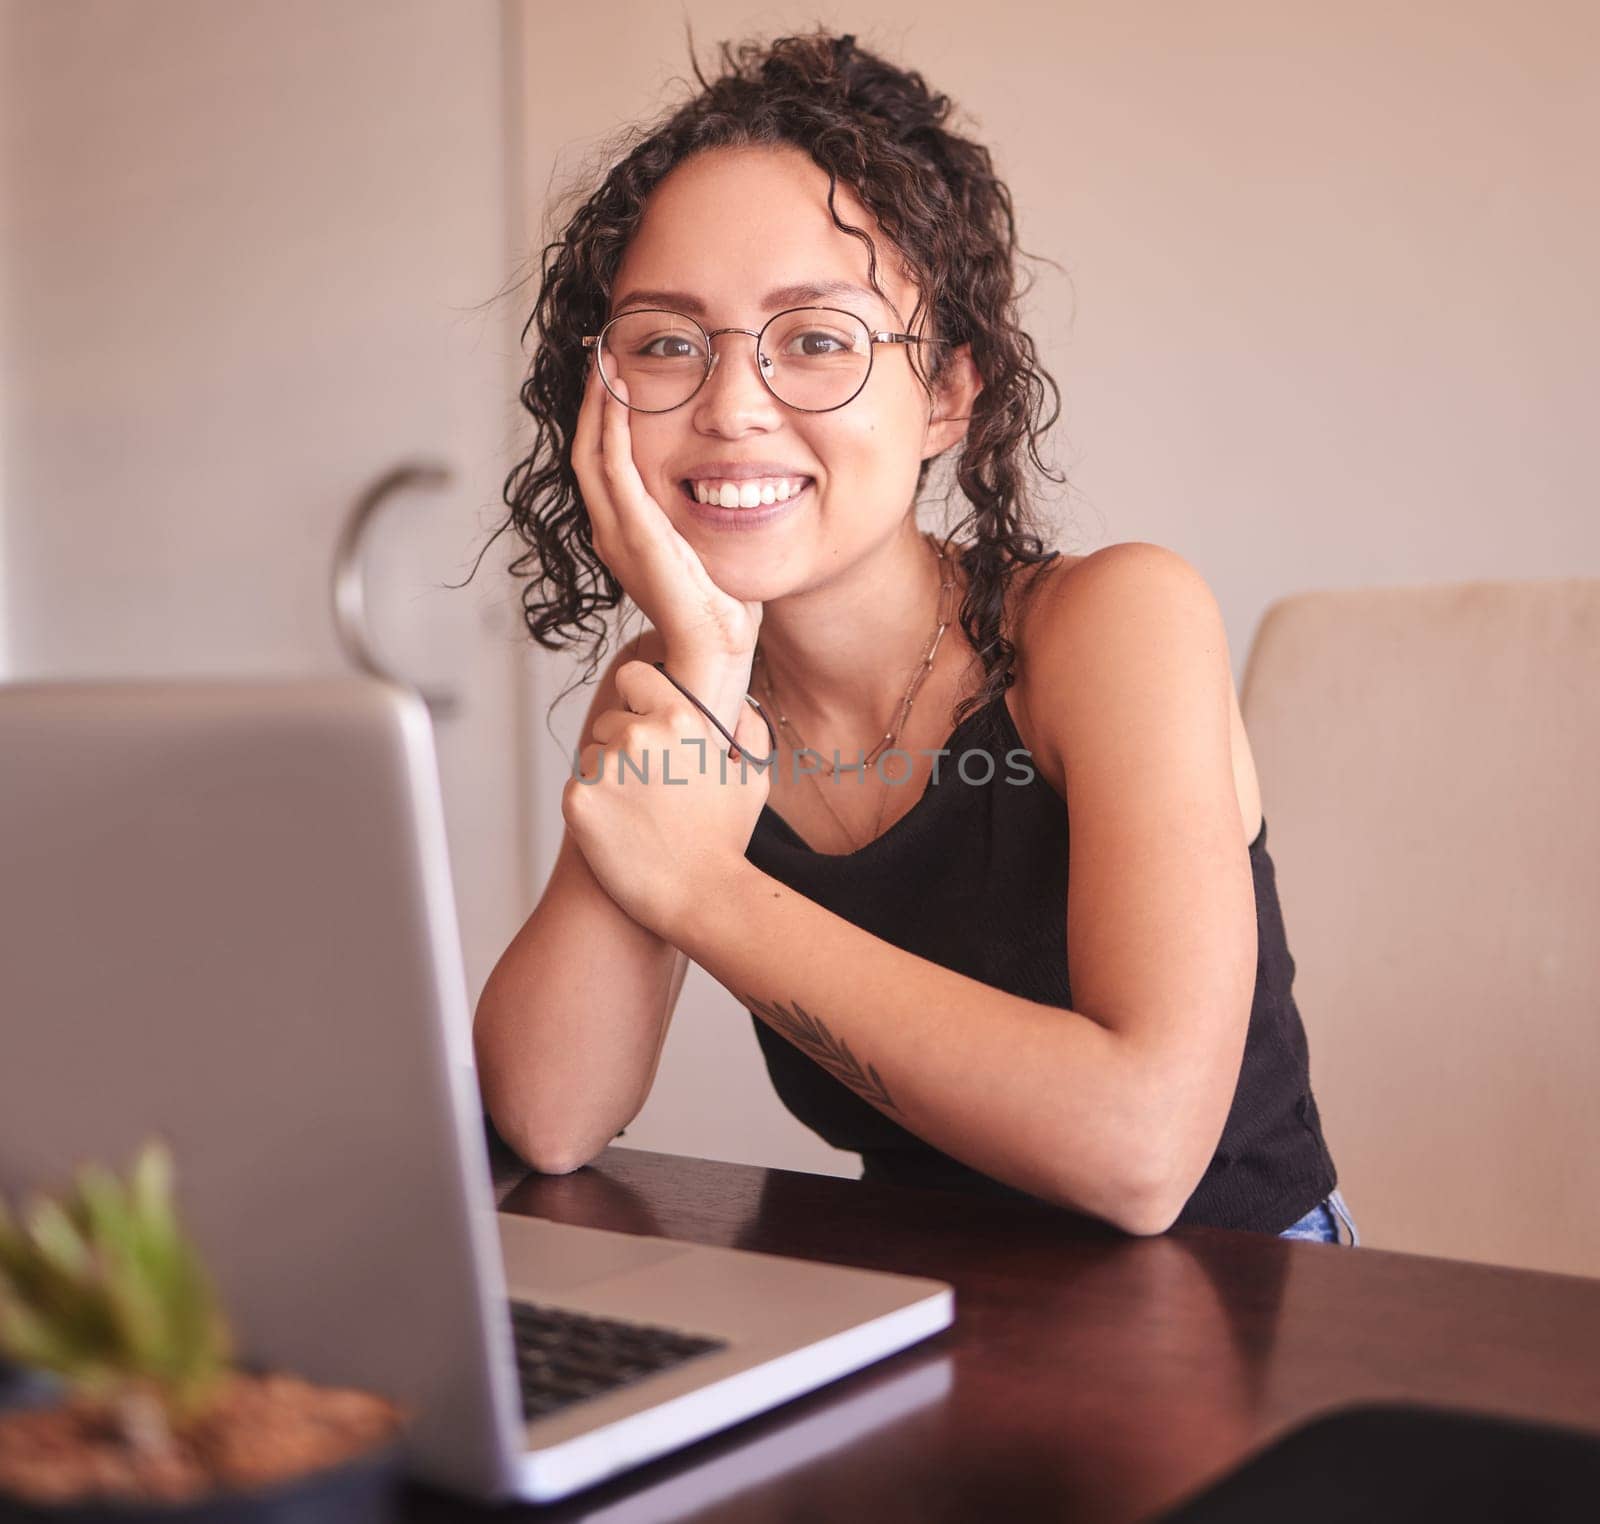 Laptop, smile and woman in portrait in home for planning, website and remote worker. Blog, networking and social media with female person or freelancer for email, technology and working in California.